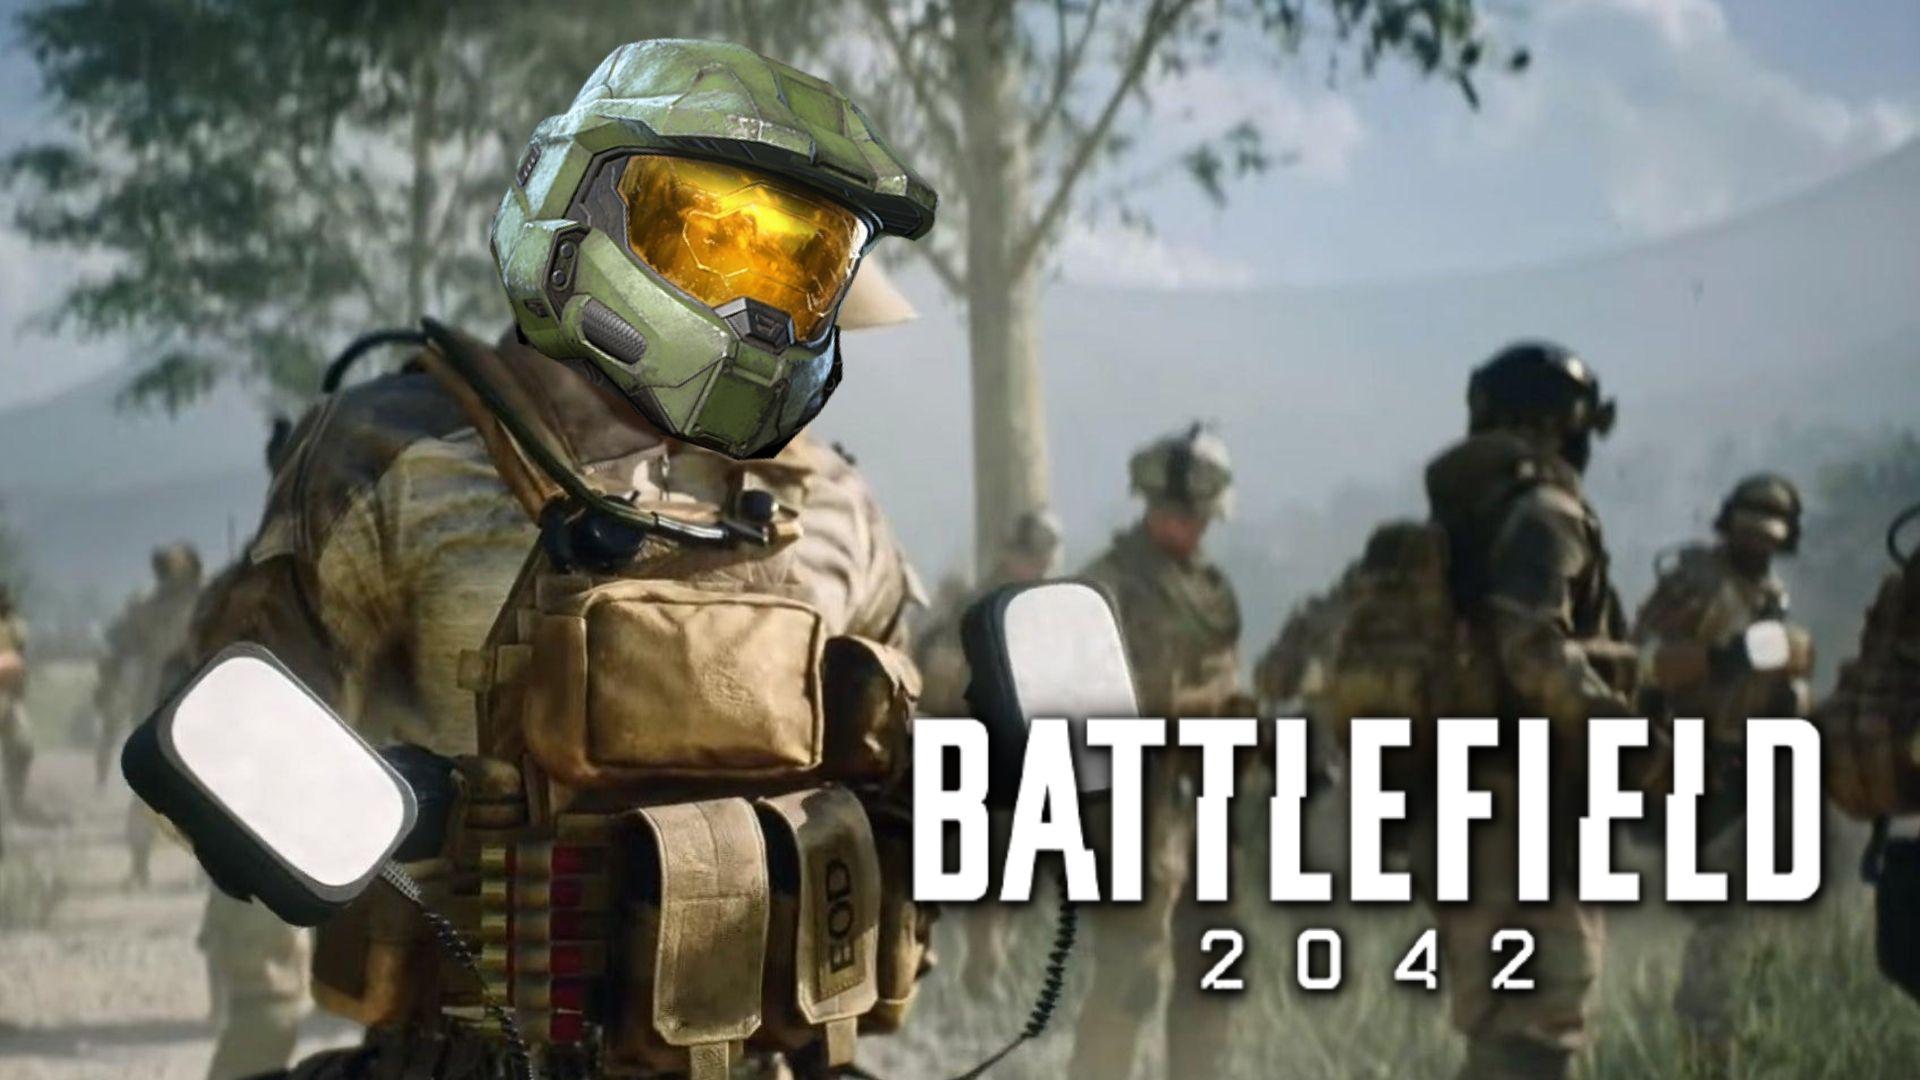 After Battlefield 2042 flop, EA pins hopes for single-player comeback on  Halo co-creator